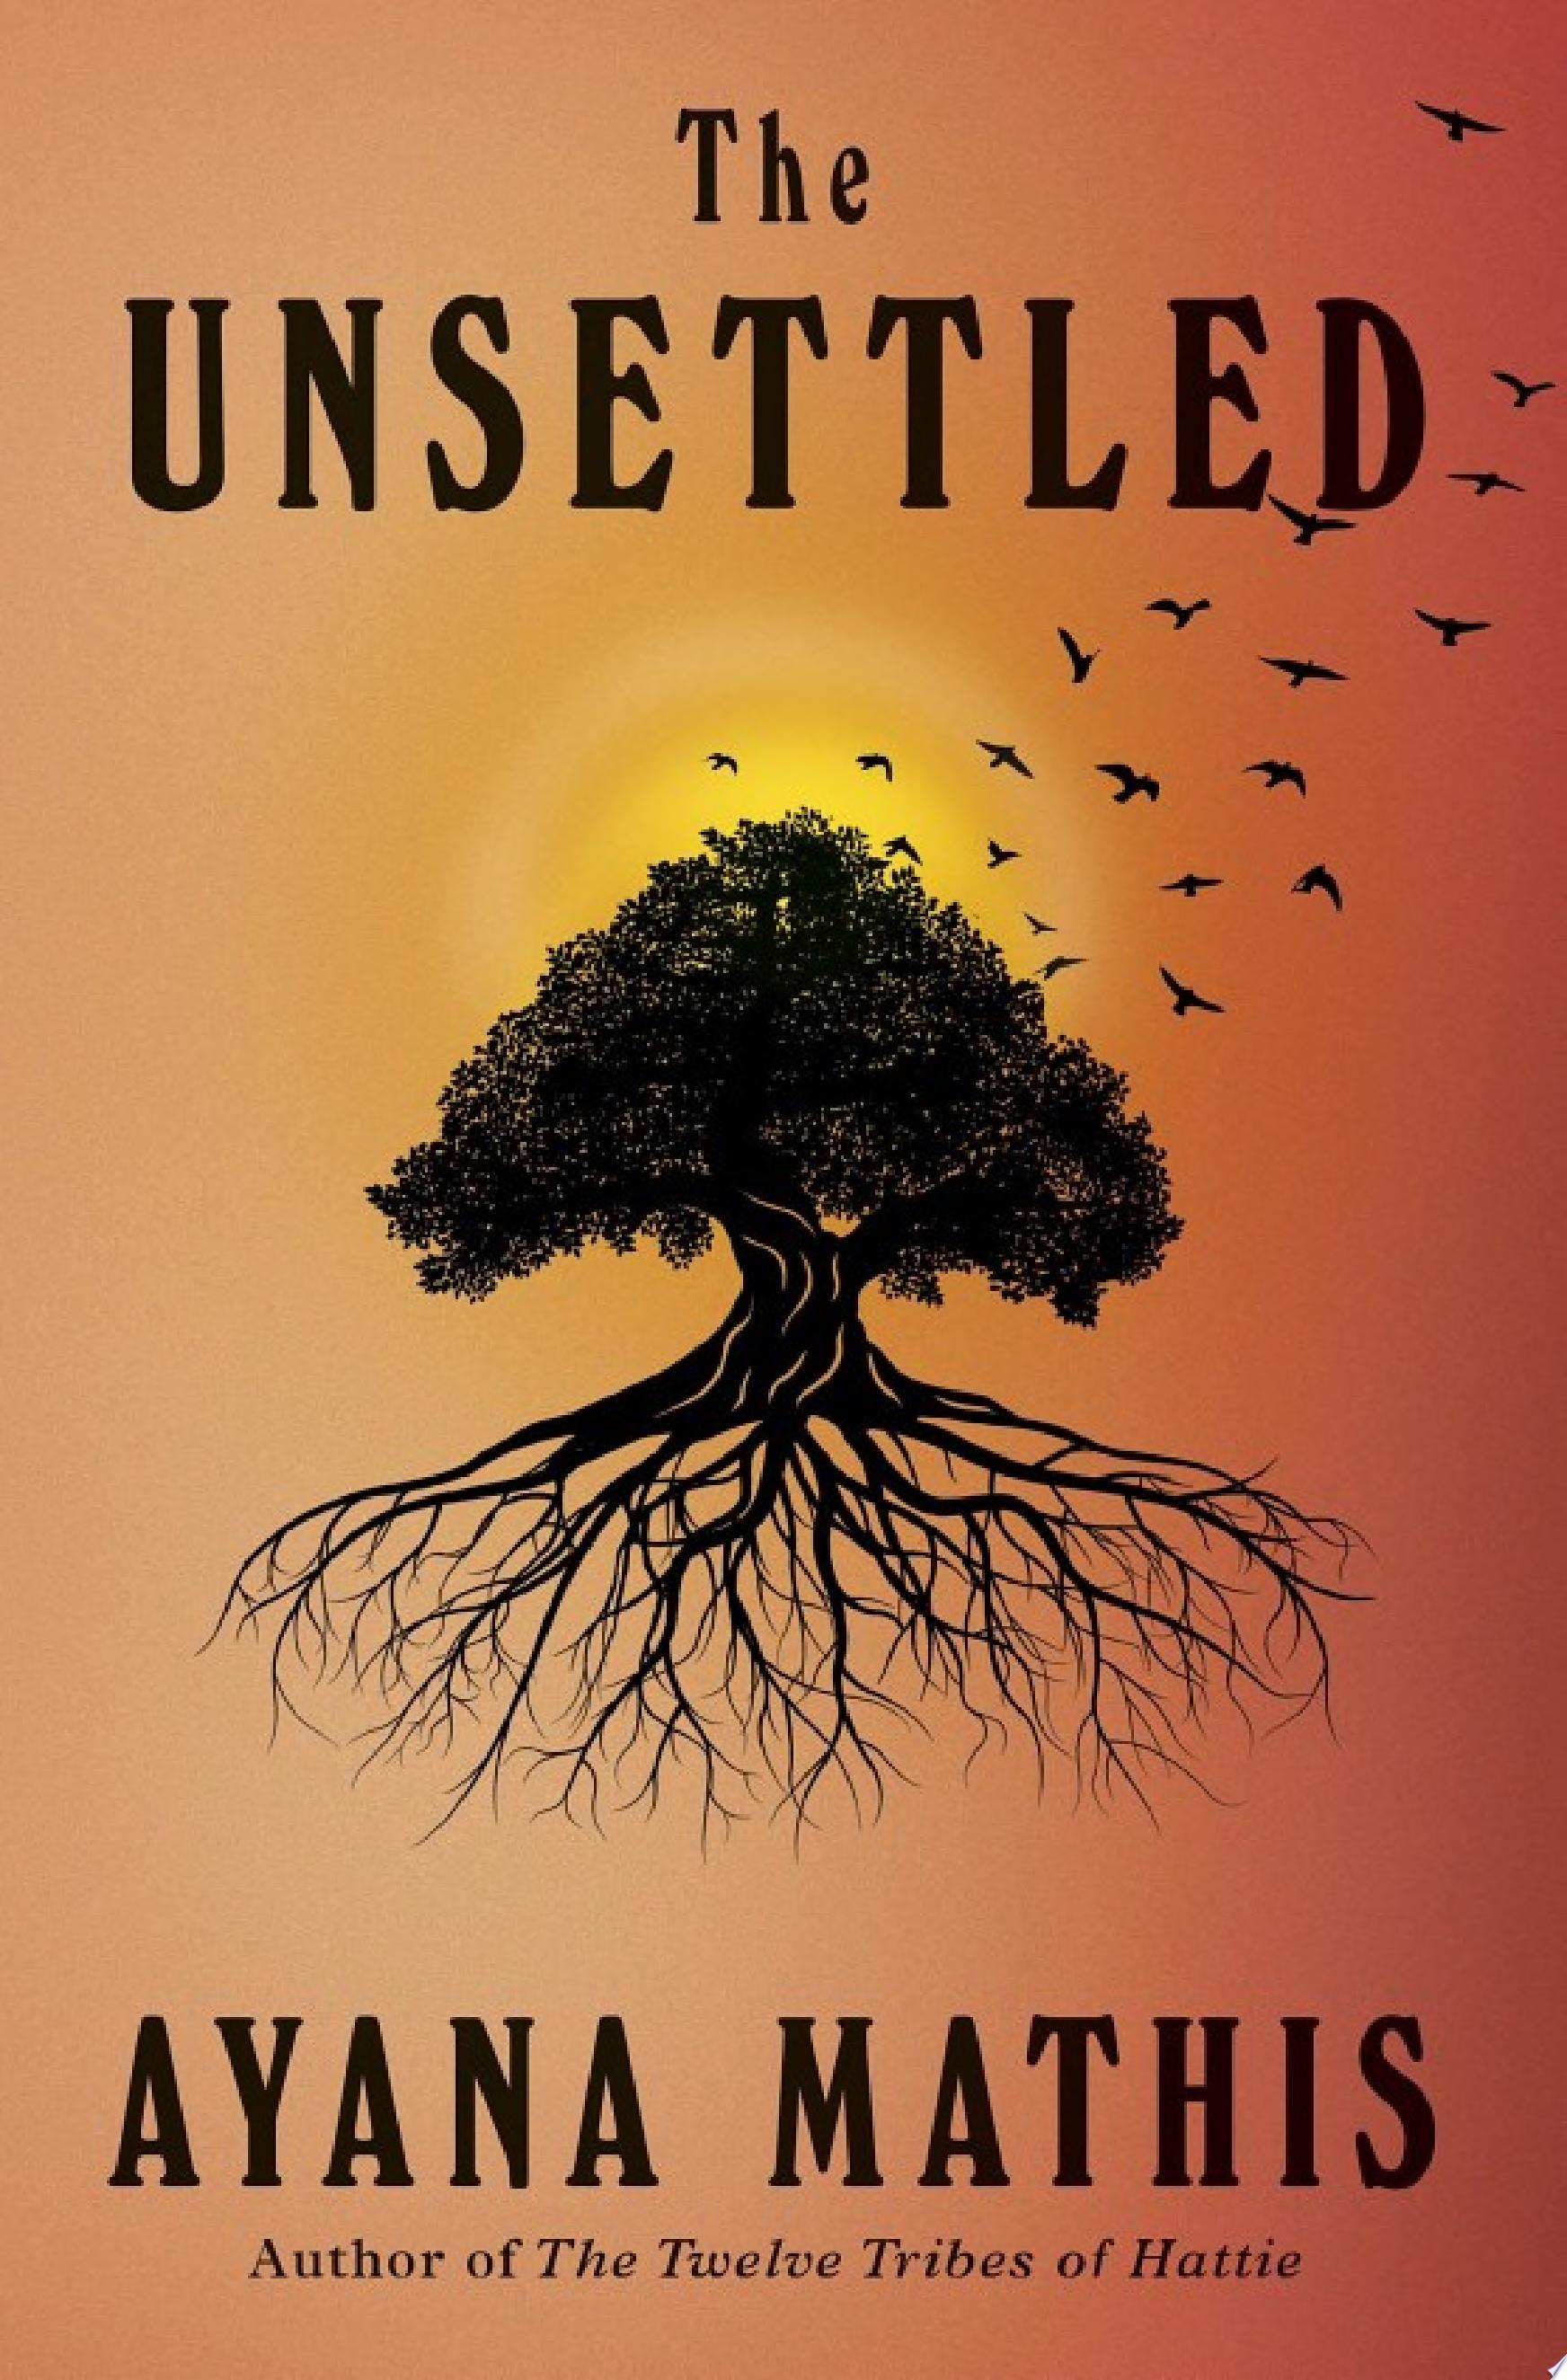 Image for "The Unsettled"